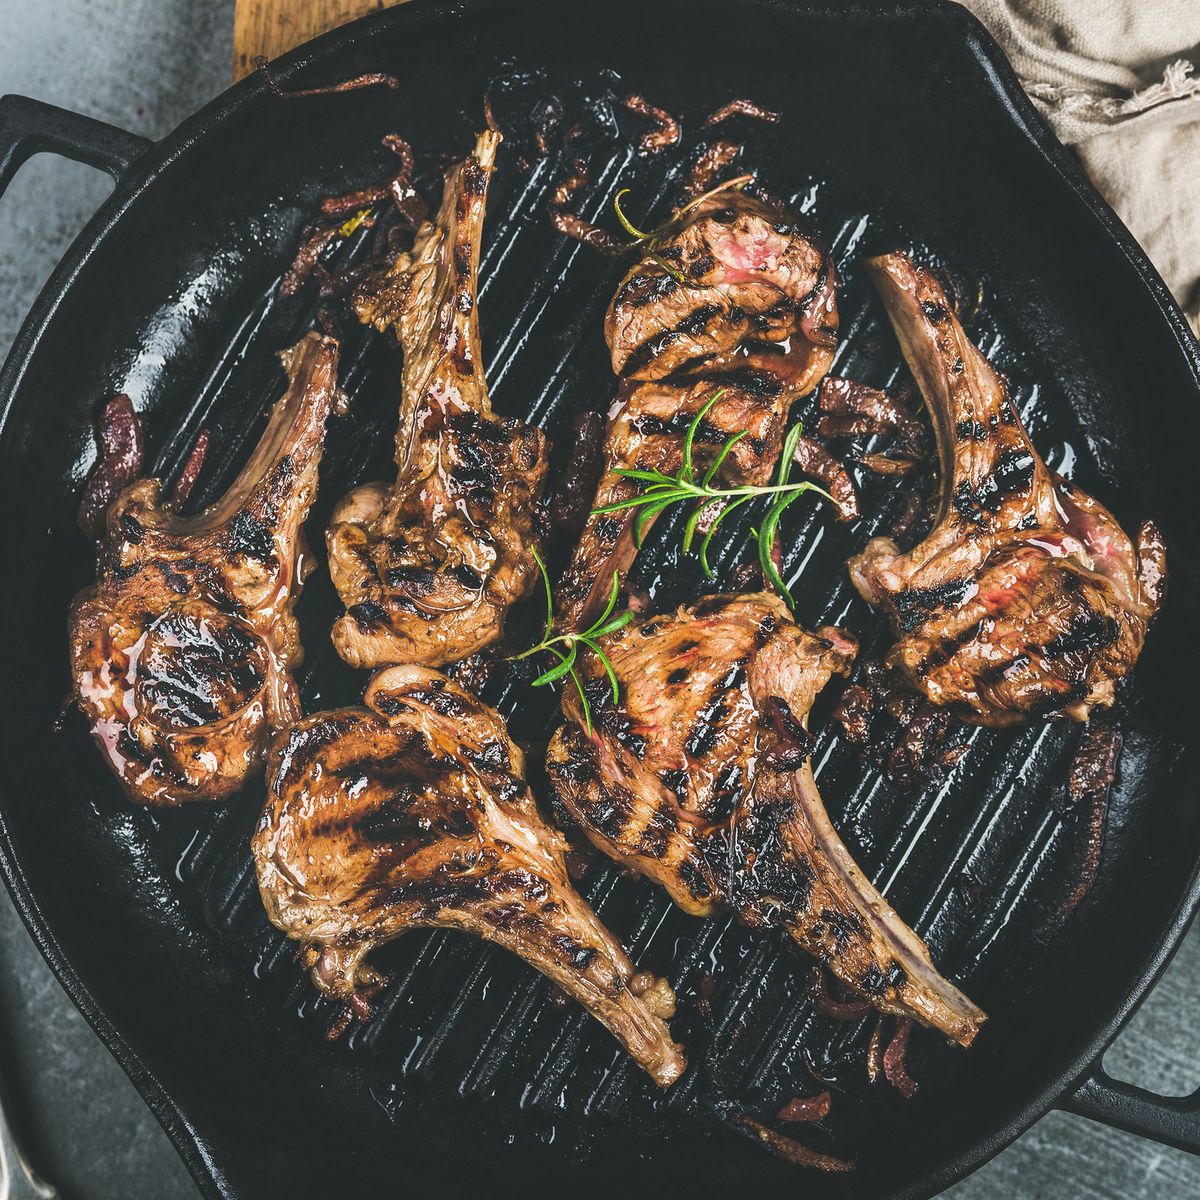 Barbecue dinner with grilled lamb meat chops in pan